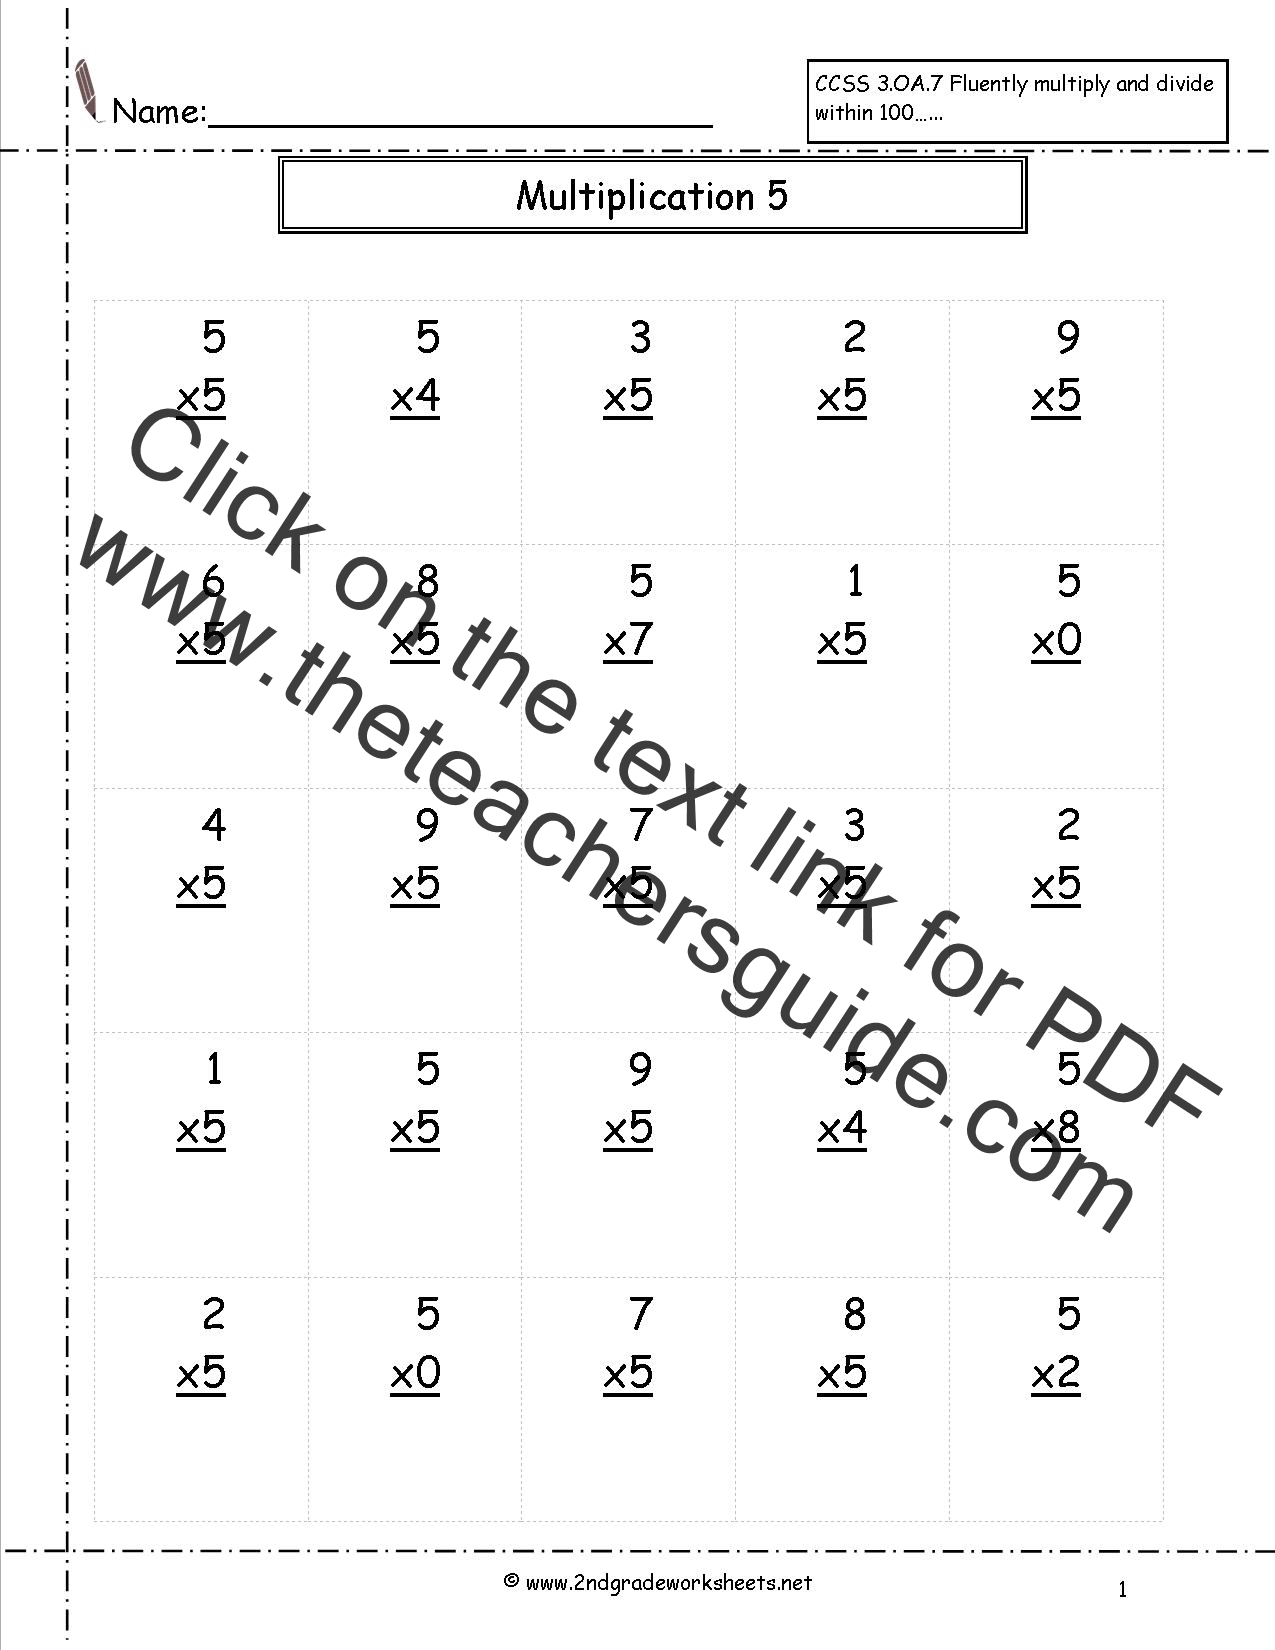 free-printable-multiplication-worksheets-for-grade-3-to-5